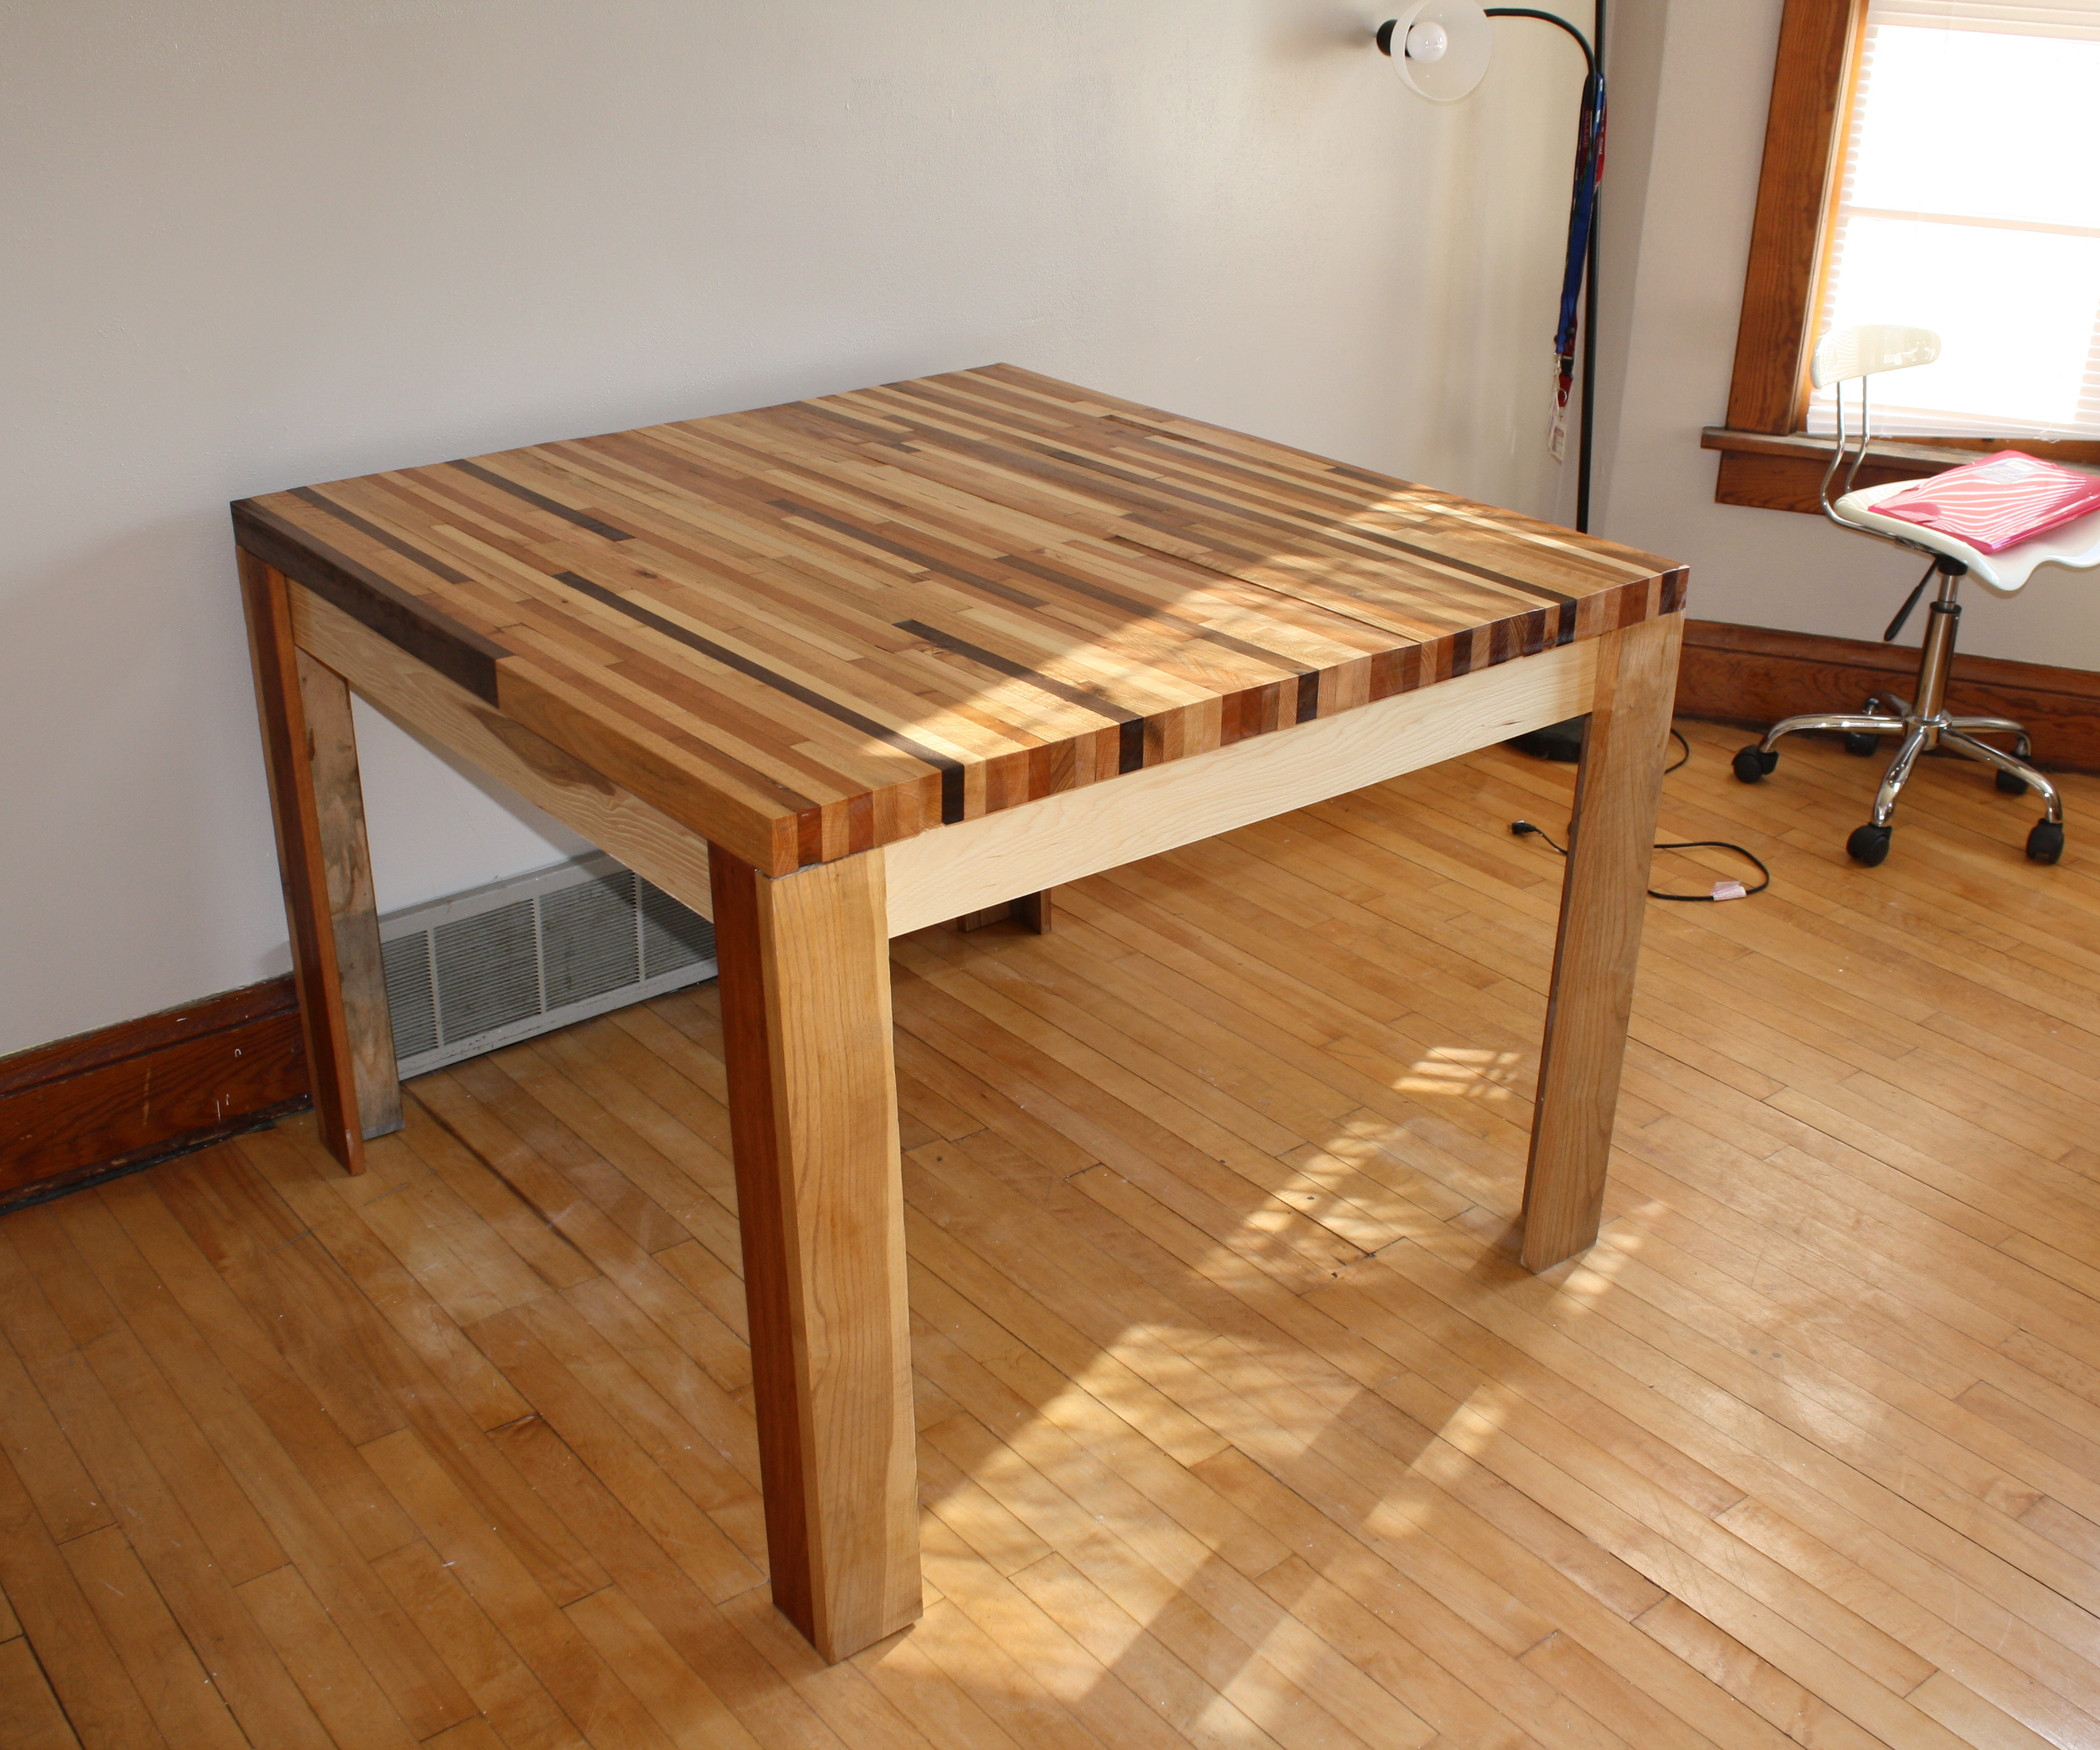 DIY Wood Tables
 Butcher Block Hardwood Table 5 Steps with